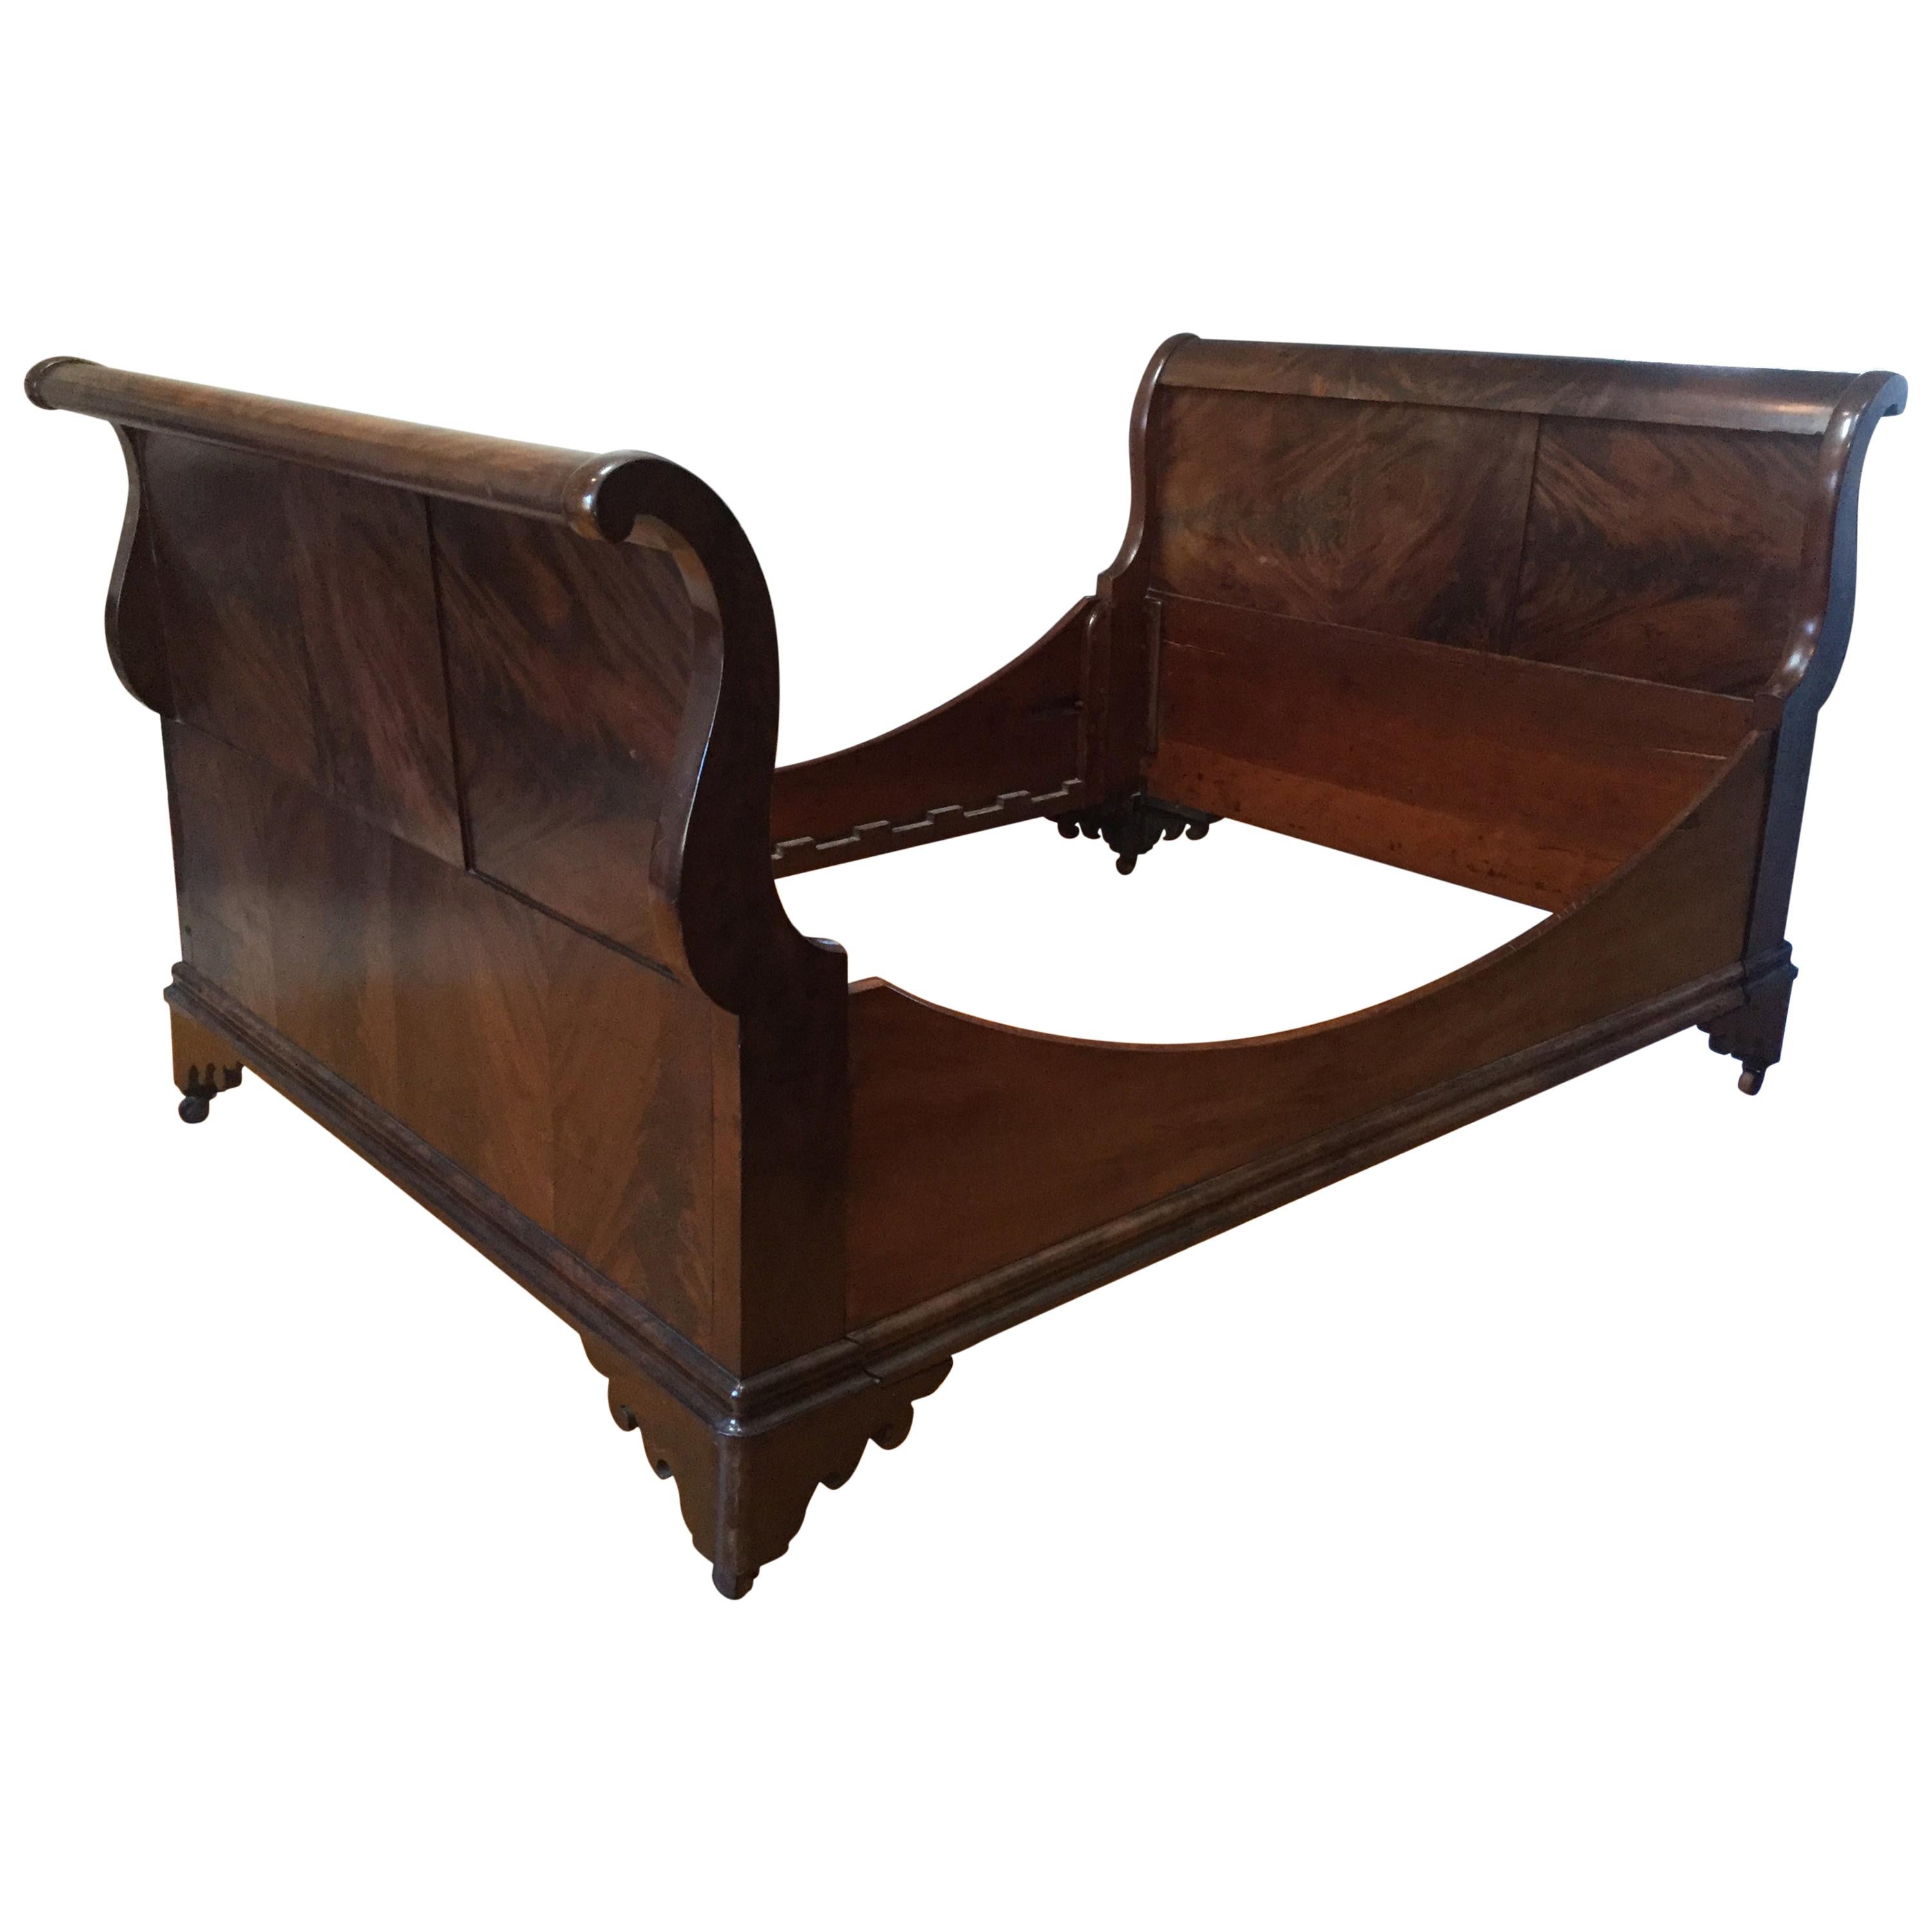 English/Scottish Antique Flame Mahogany Full Bed For Sale